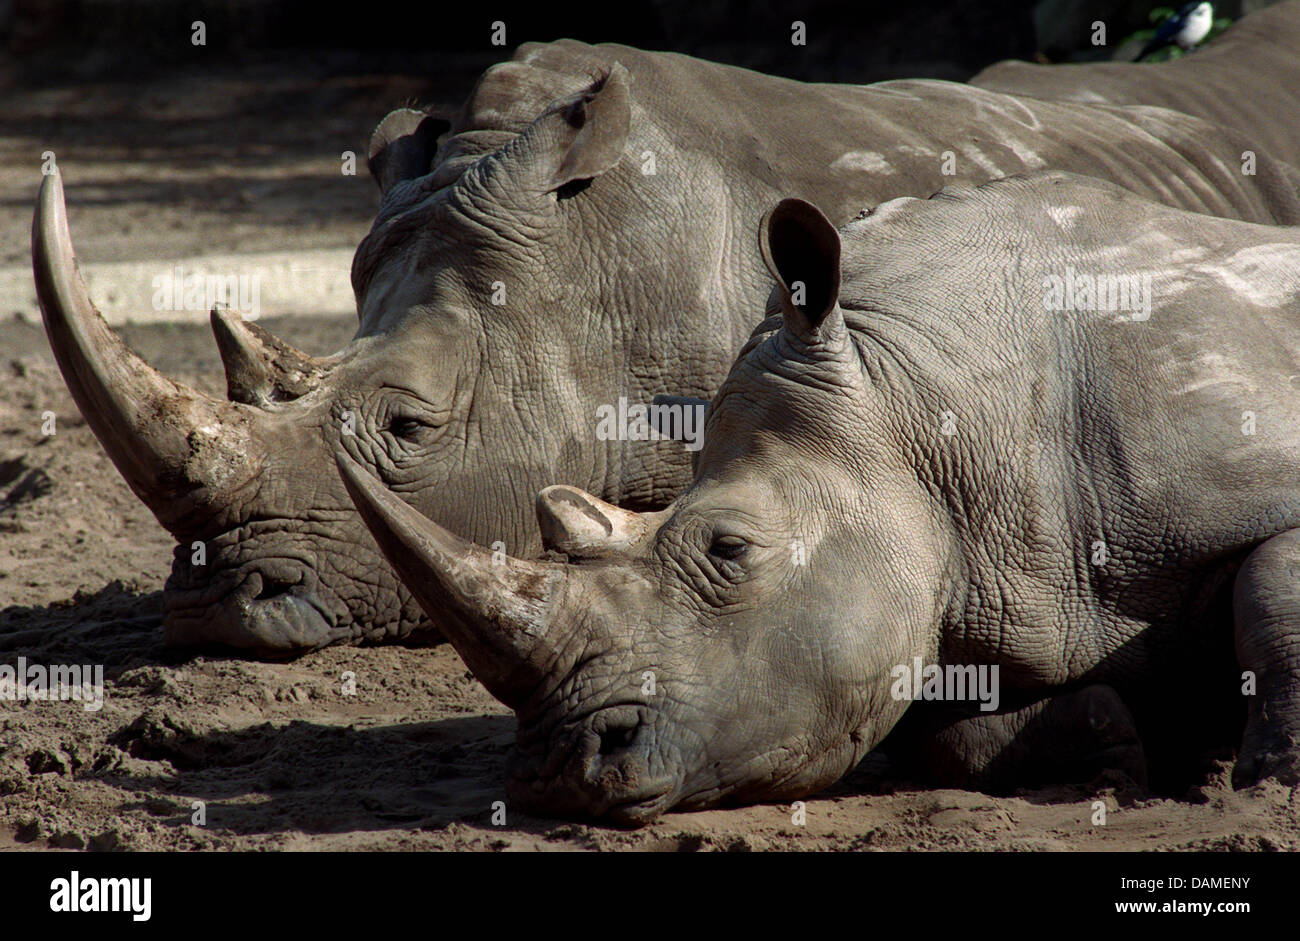 (FILE) An archive photo dated 06 October 1995 shows two white rhinoceroses enjoying the midday sunbathing at Friedrichsfelde animal park in Berlin, Germany. Rhinoceroses have been roaming the earth for 65 million years and many species have become extinct or are endangered. Well organised poachers hunt rhinoceroses for their horns, which fetch a high price on the black market. Phot Stock Photo